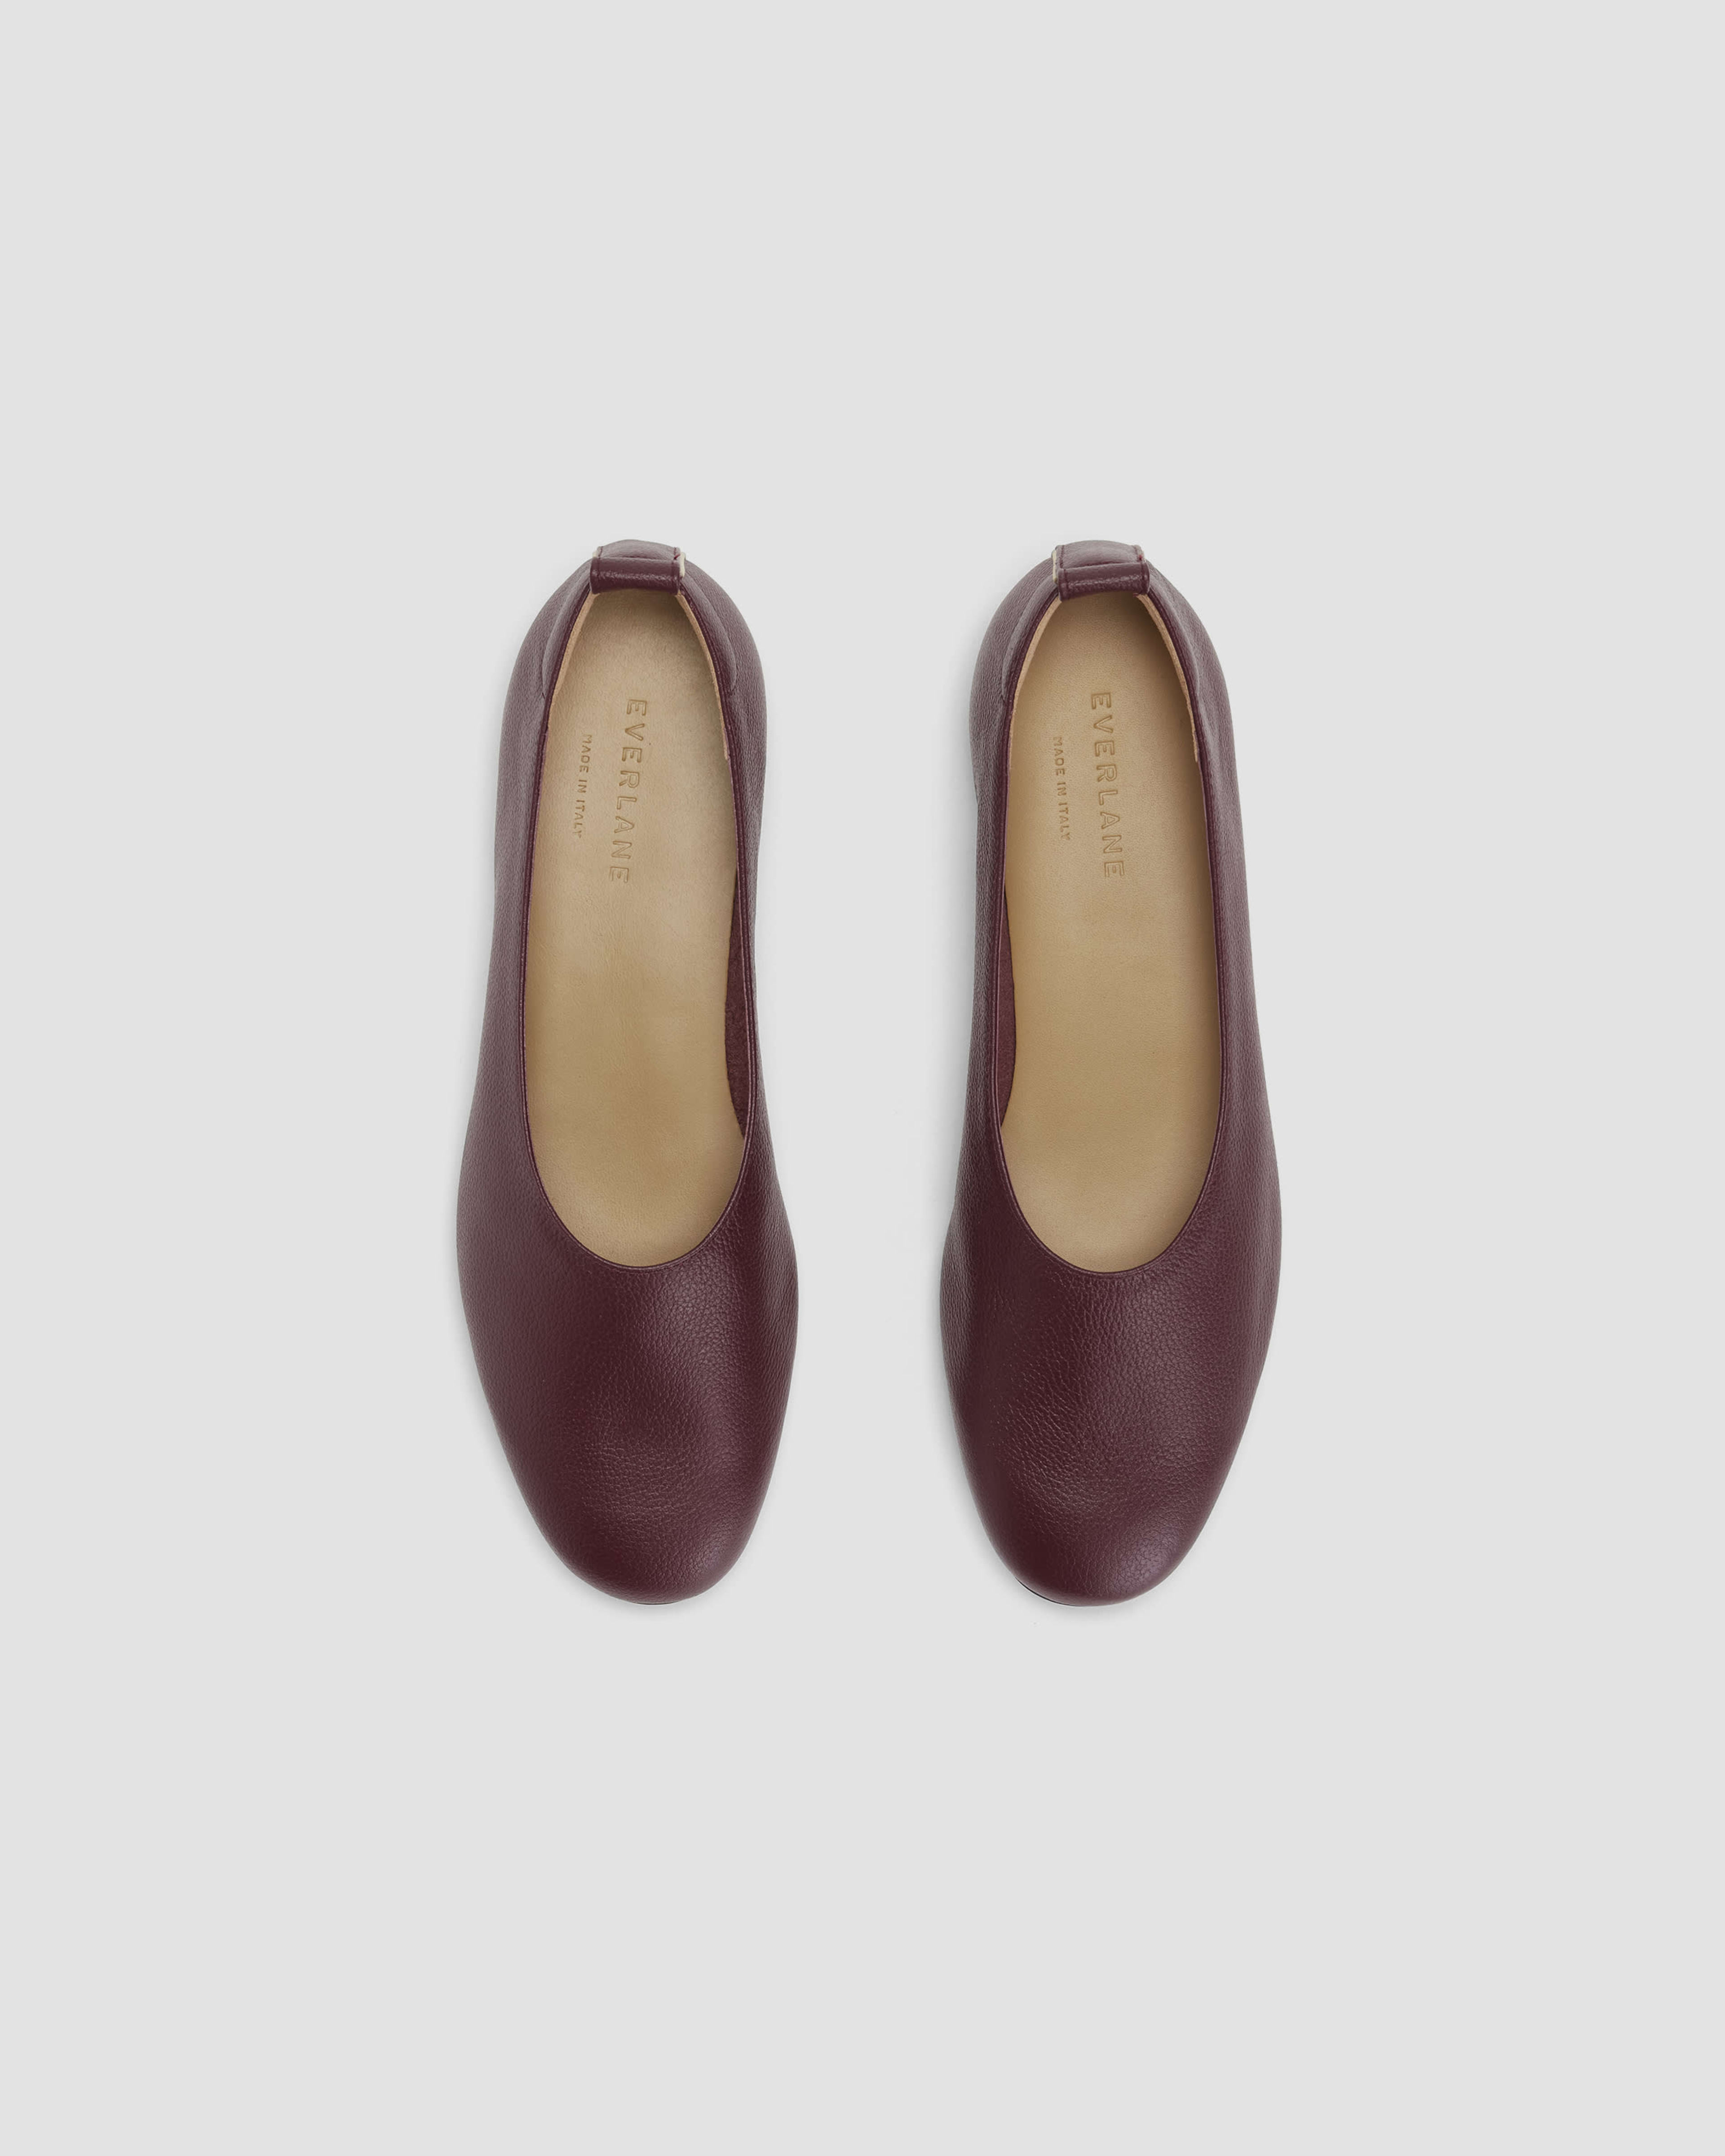 The Day Glove Bordeaux – Everlane